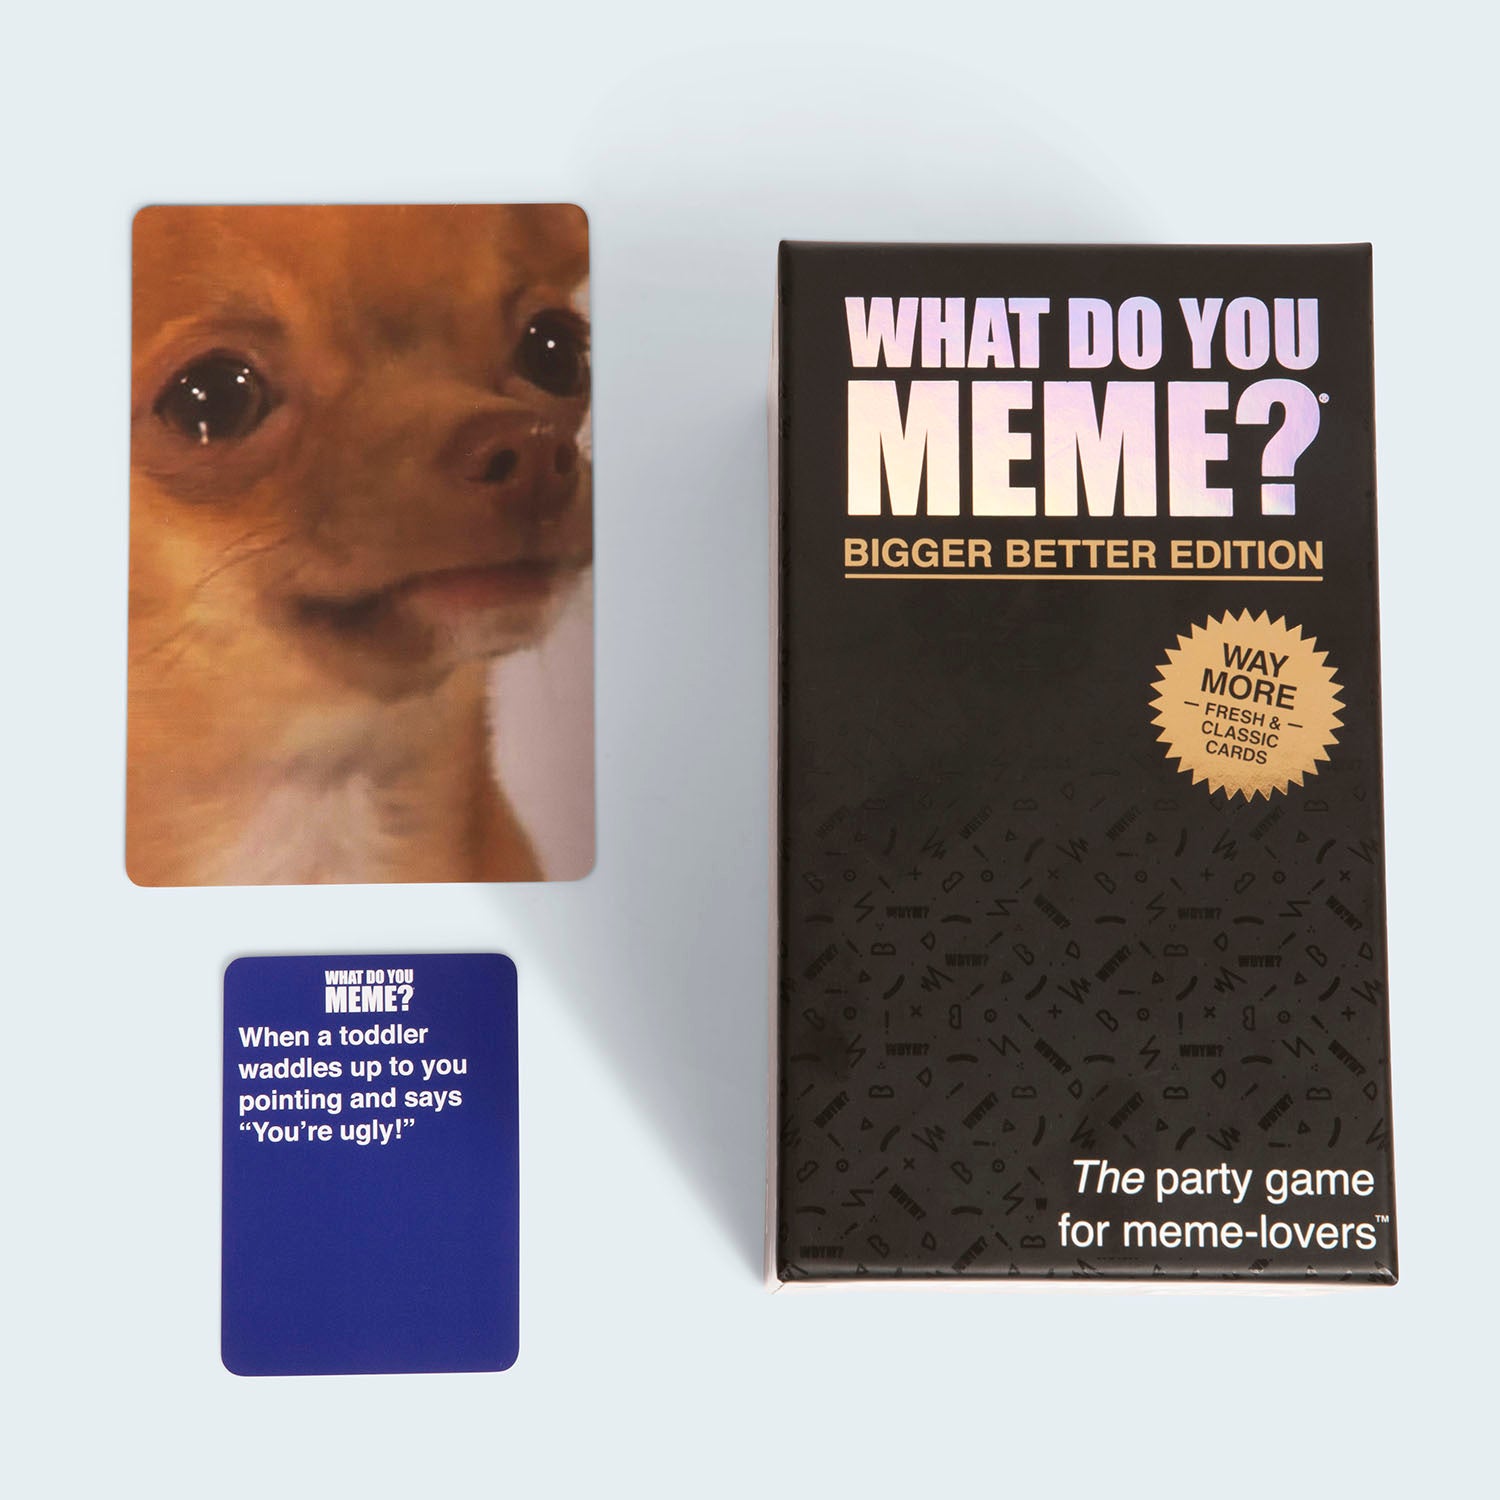 what-do-you-meme-bigger-better-edition-game-box-and-game-play-06-what-do-you-meme-by-relatable